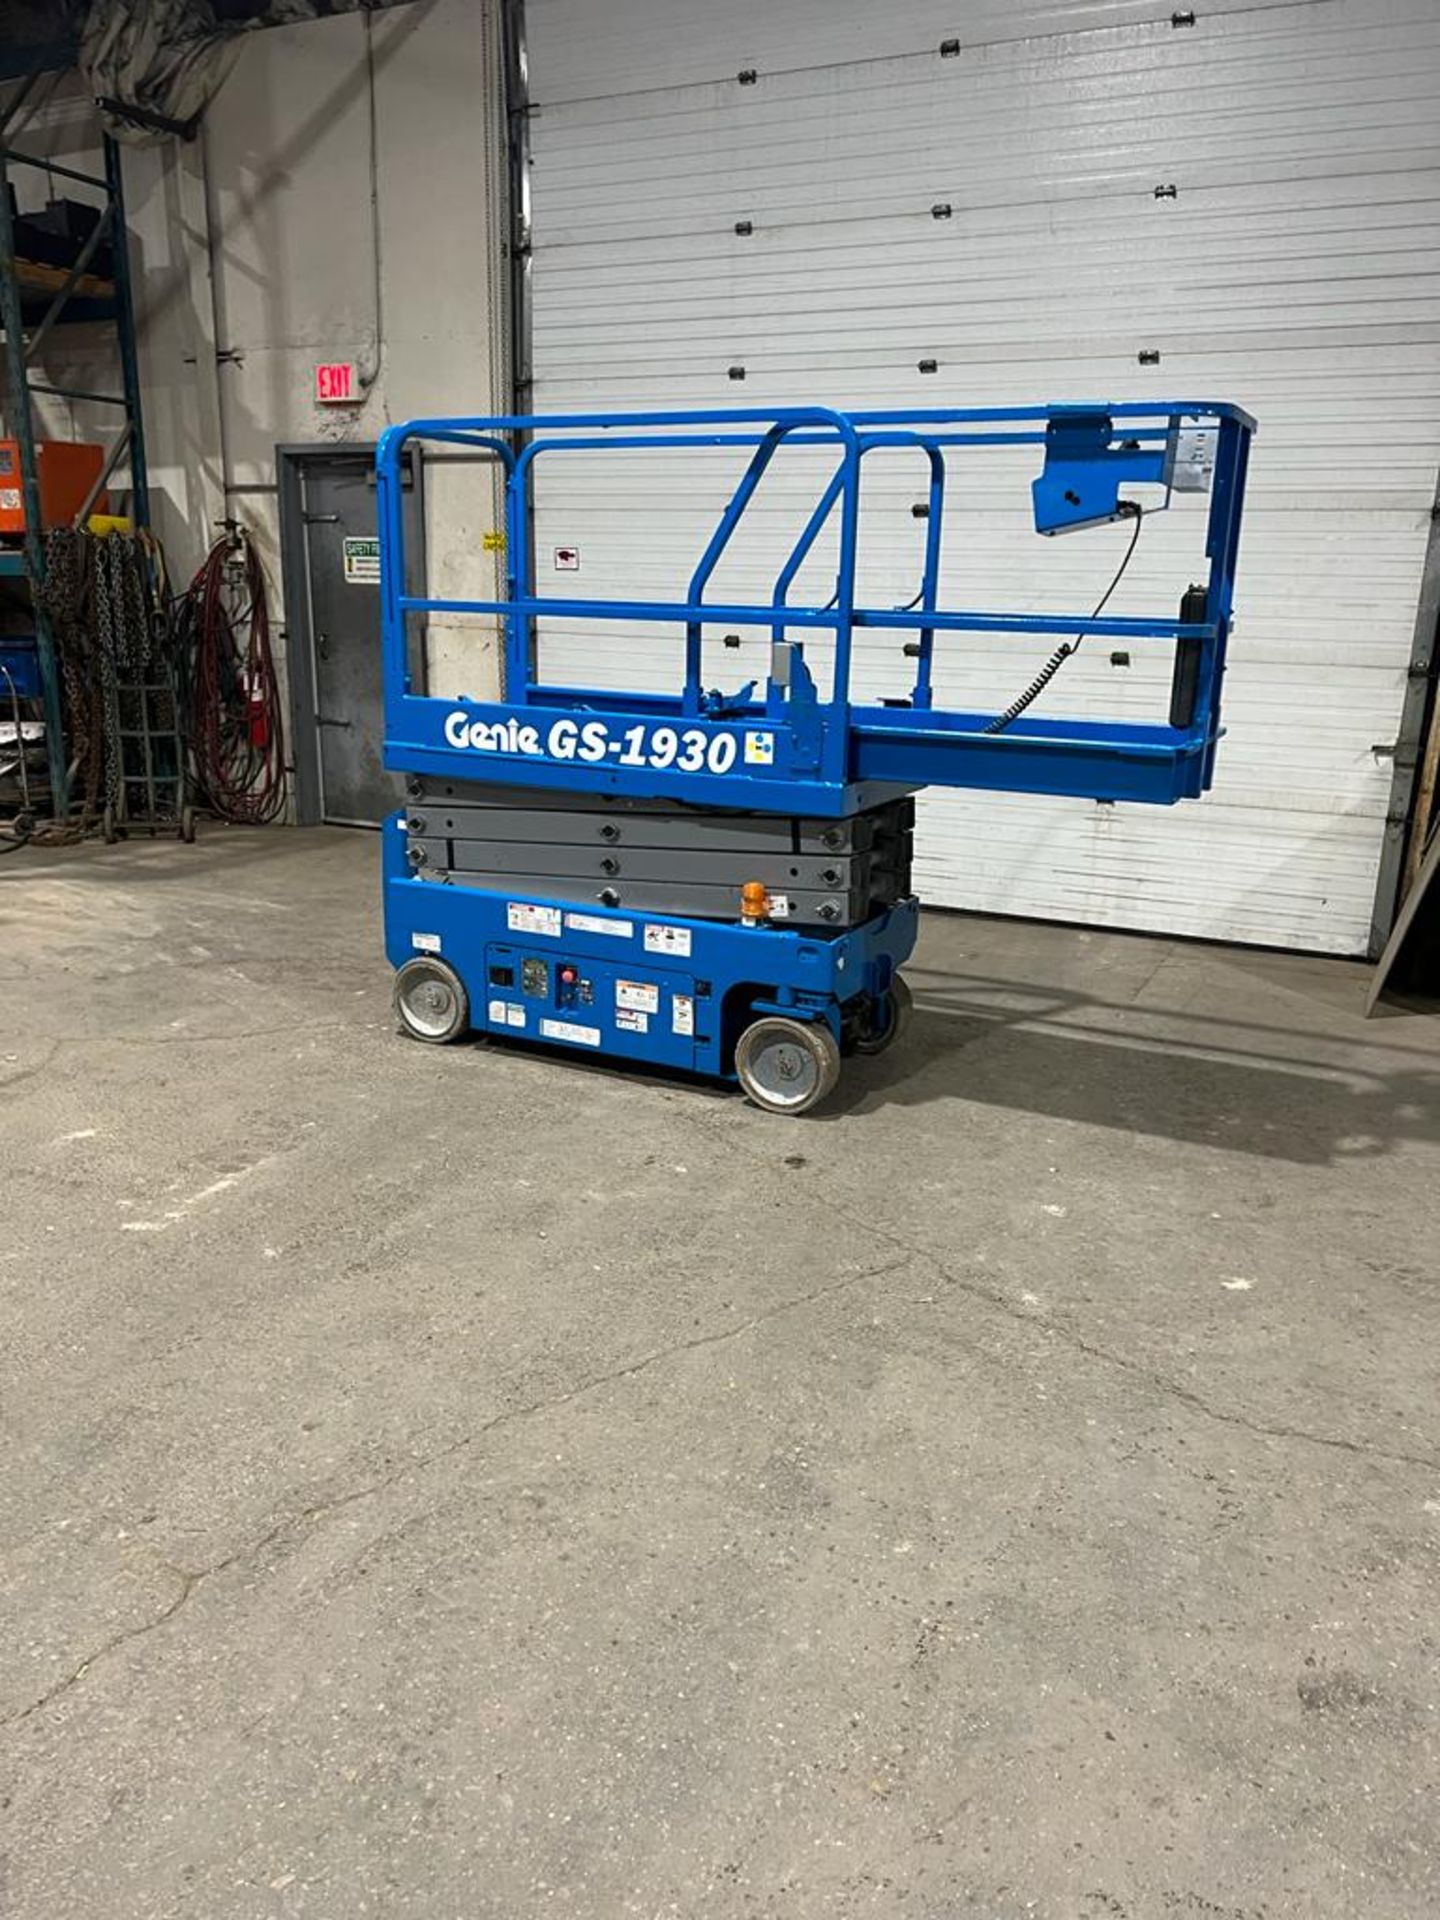 Genie GS-1930 Electric Motorized Scissor Lift - with Extendable Platform Deck with pendant - Image 2 of 2